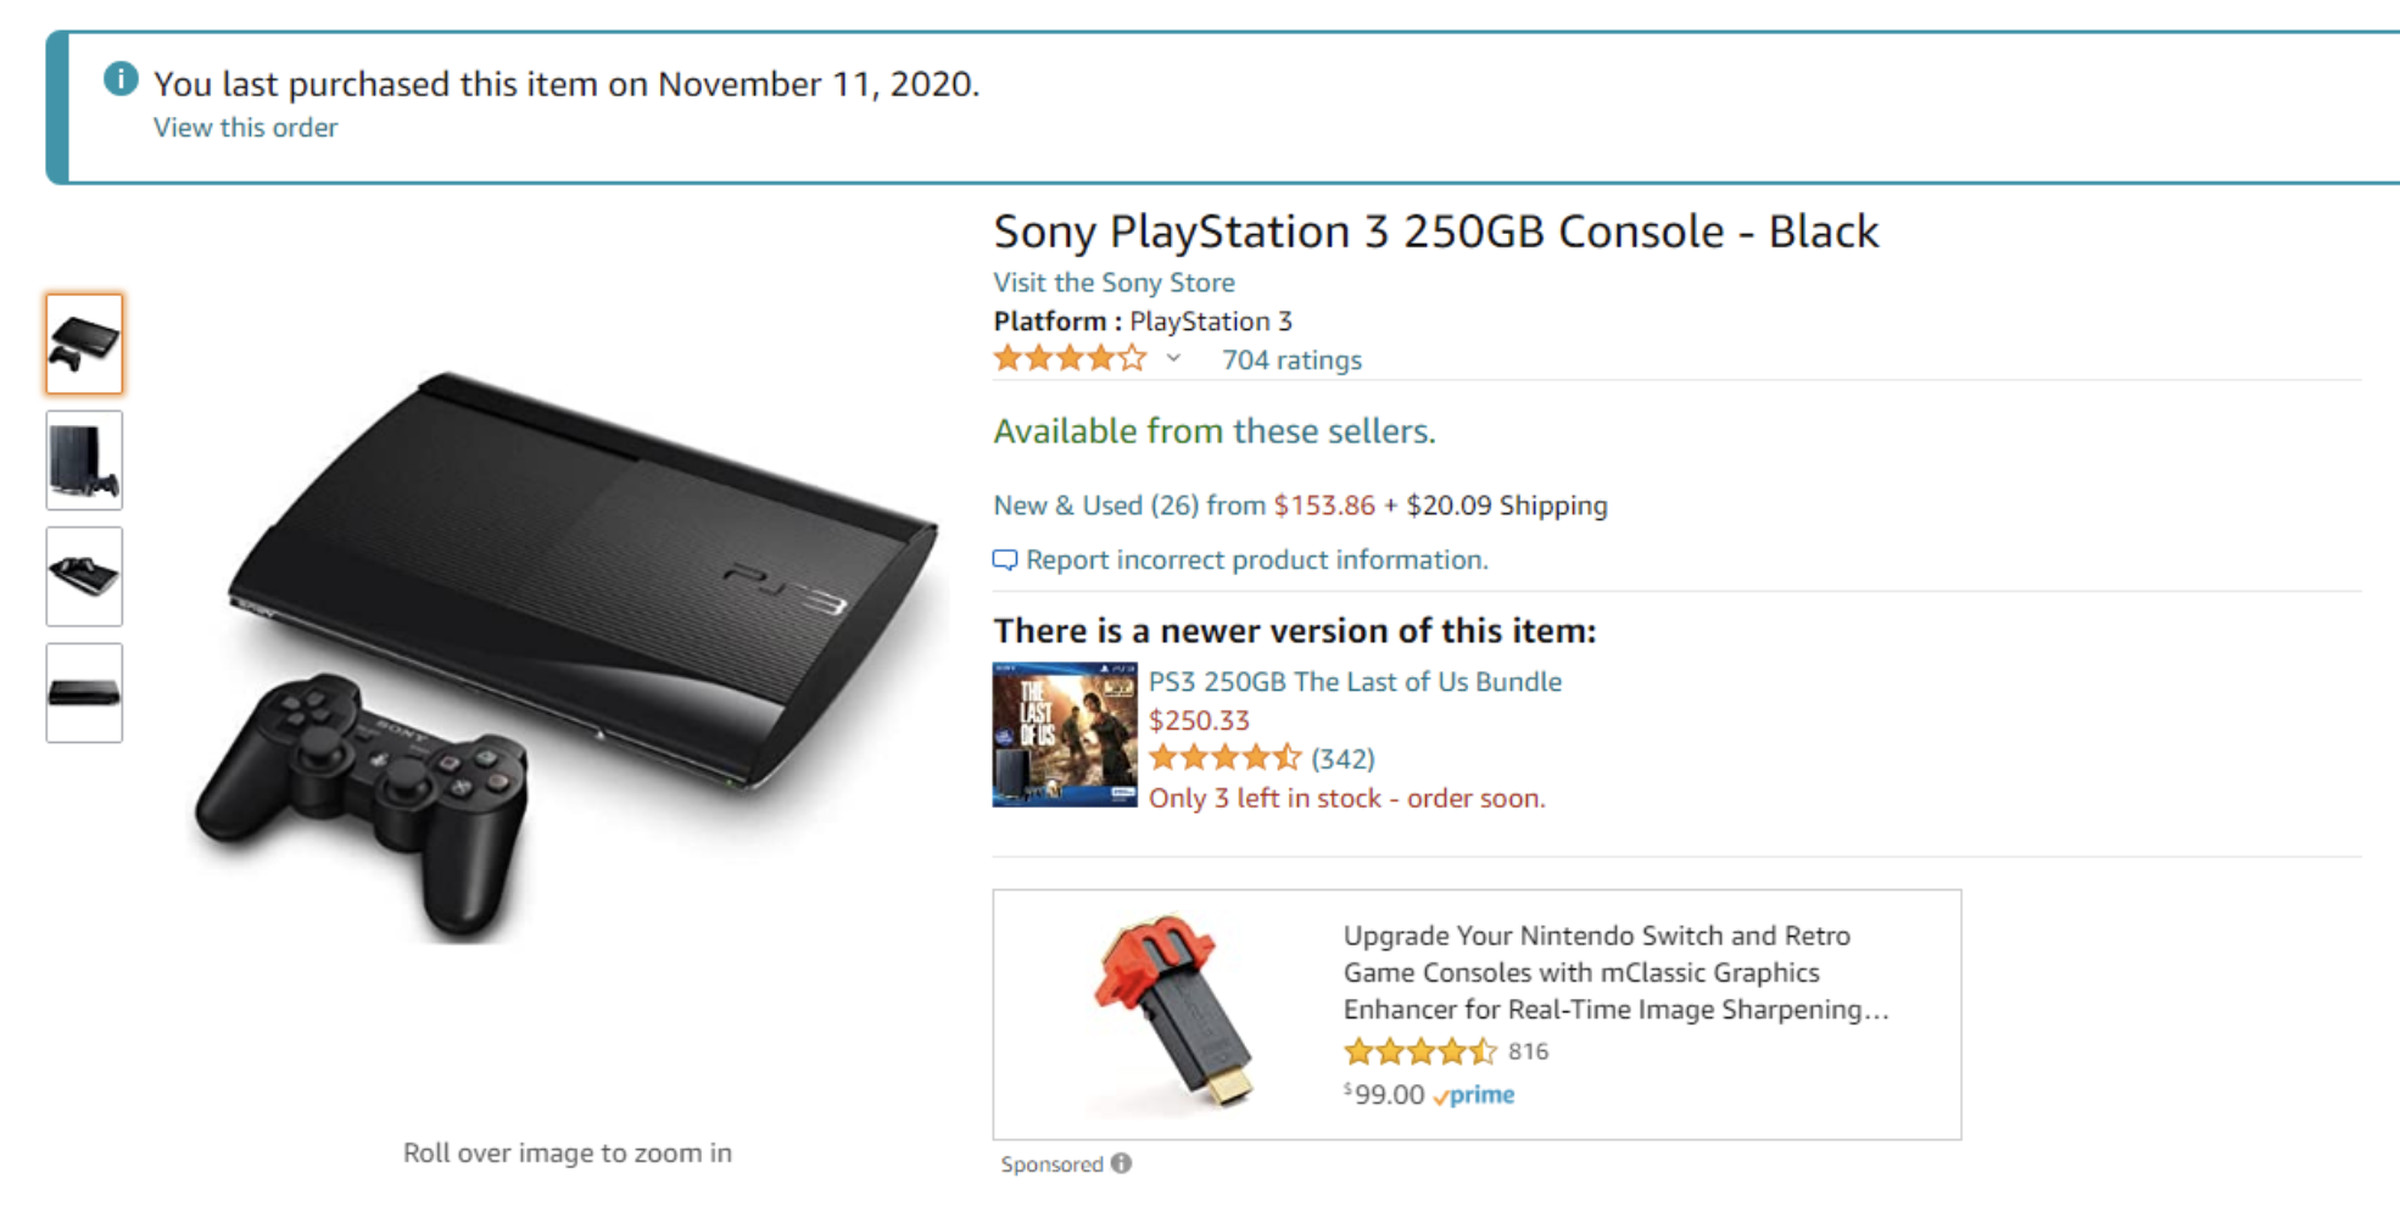 Amazon order confirmation: Sony PlayStation 3 250GB Console - Black. You last purchased this item on November 11th, 2020.